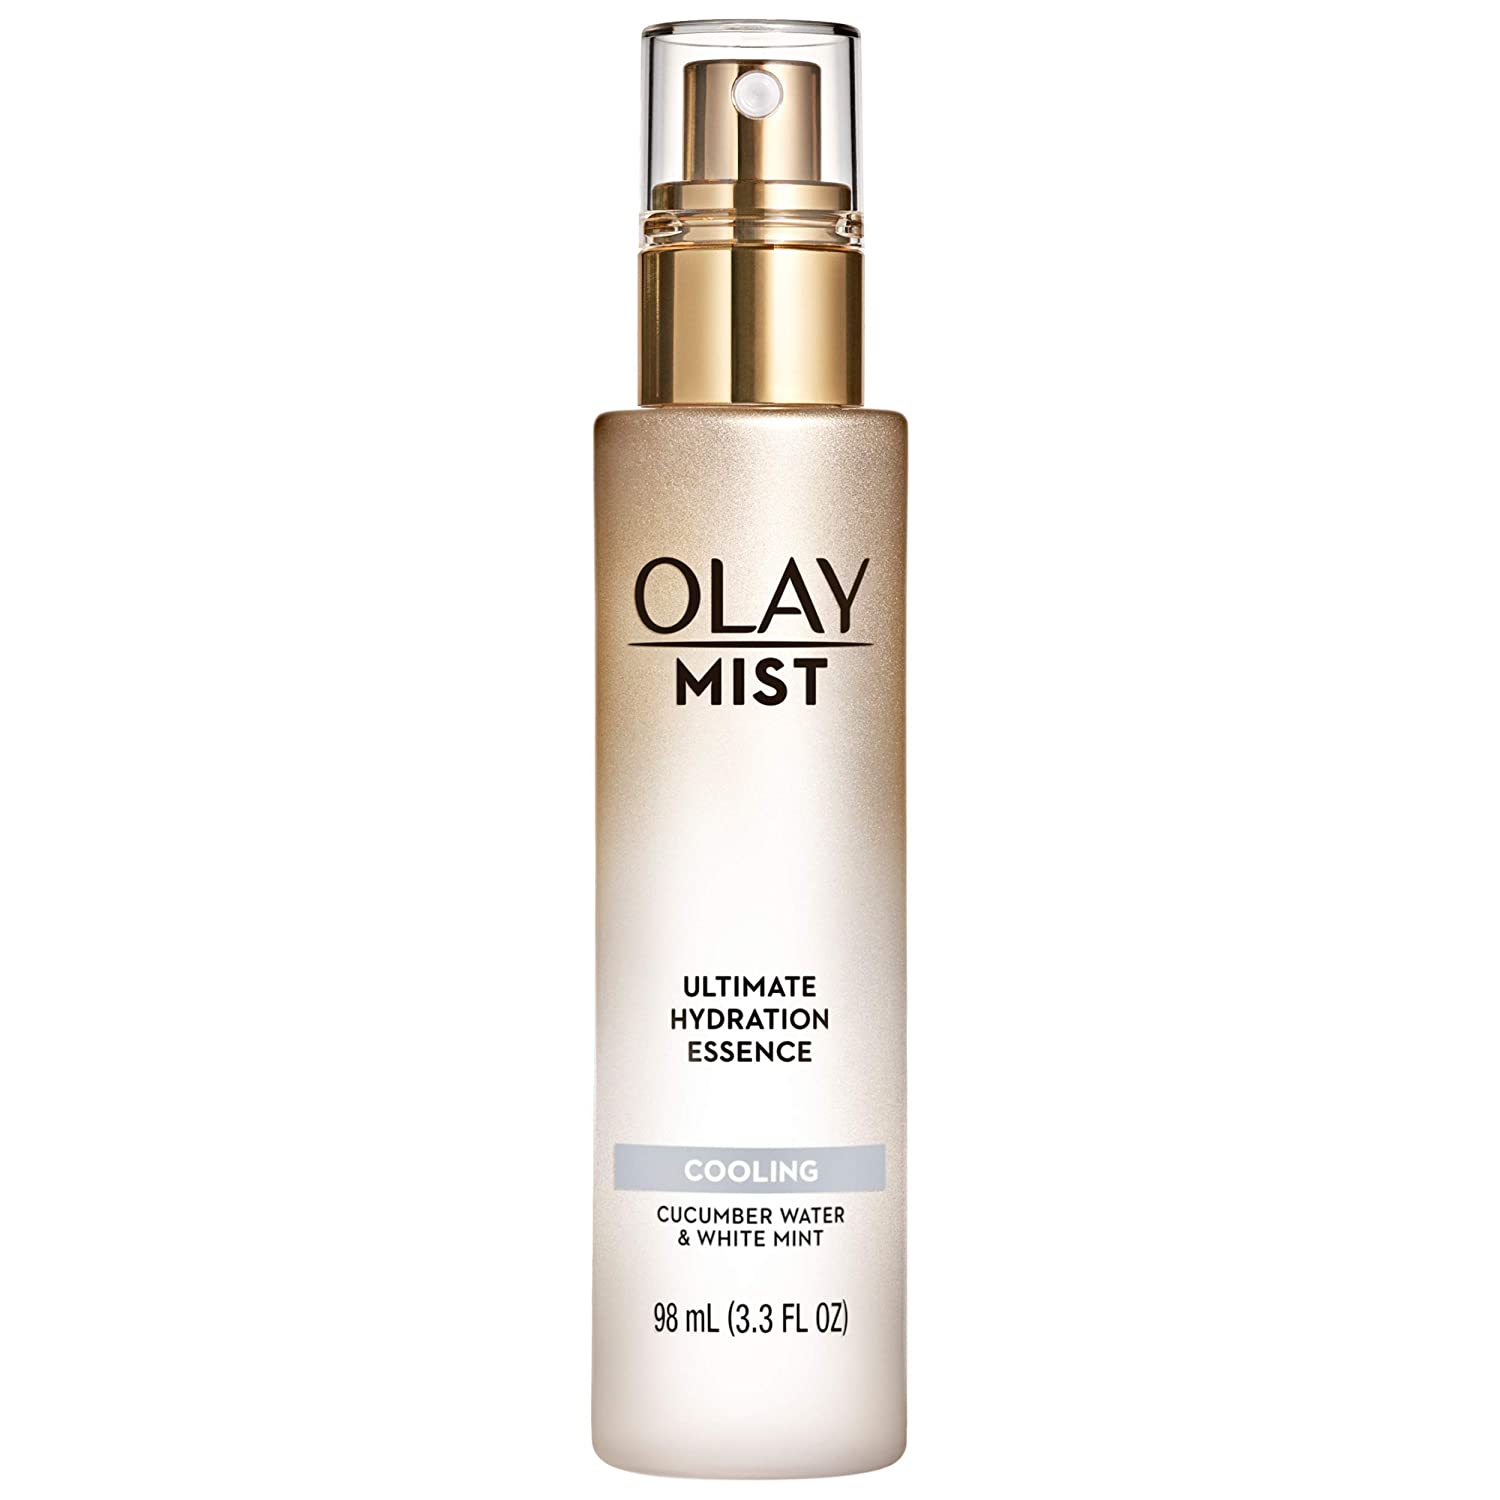  3. Face Mist by Olay, Cooling Facial Mist, Ultimate Hydration Essence 